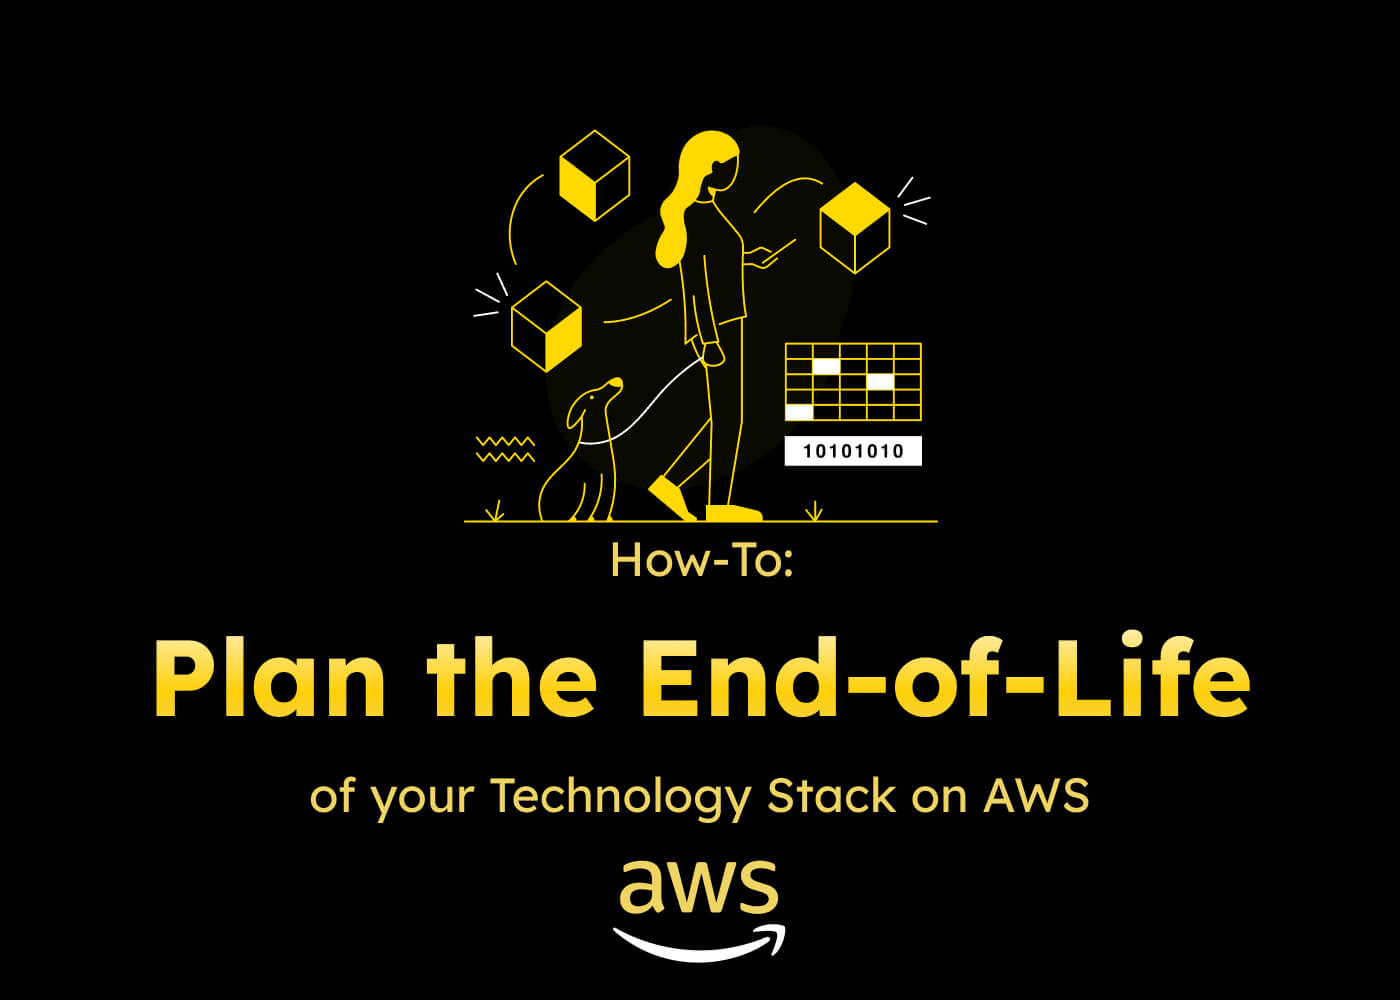 How To Plan The End-of-Life of Your Technology Stack on AWS